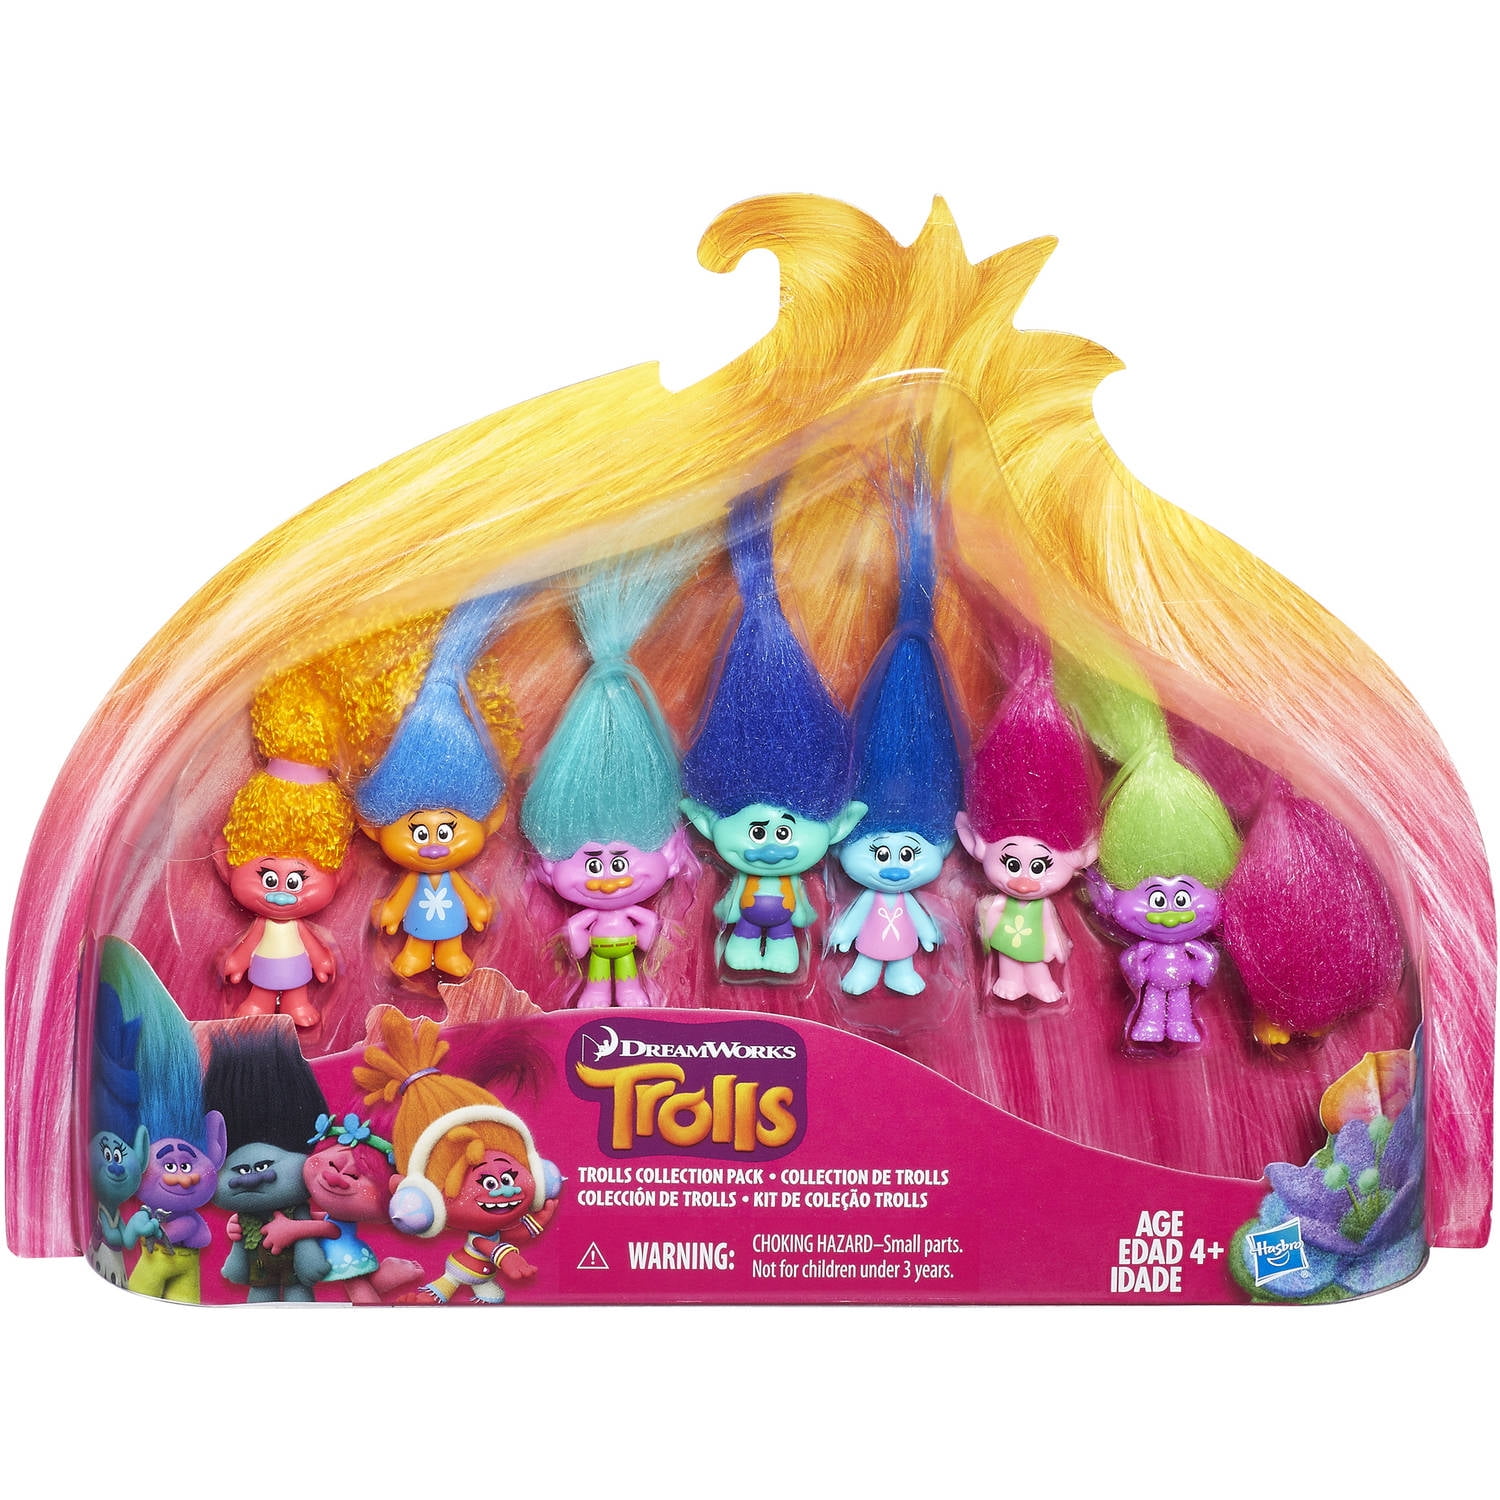 Dreamworks Trolls Movie Collection Pack (8 Mini Trolls), 1.25 Inches